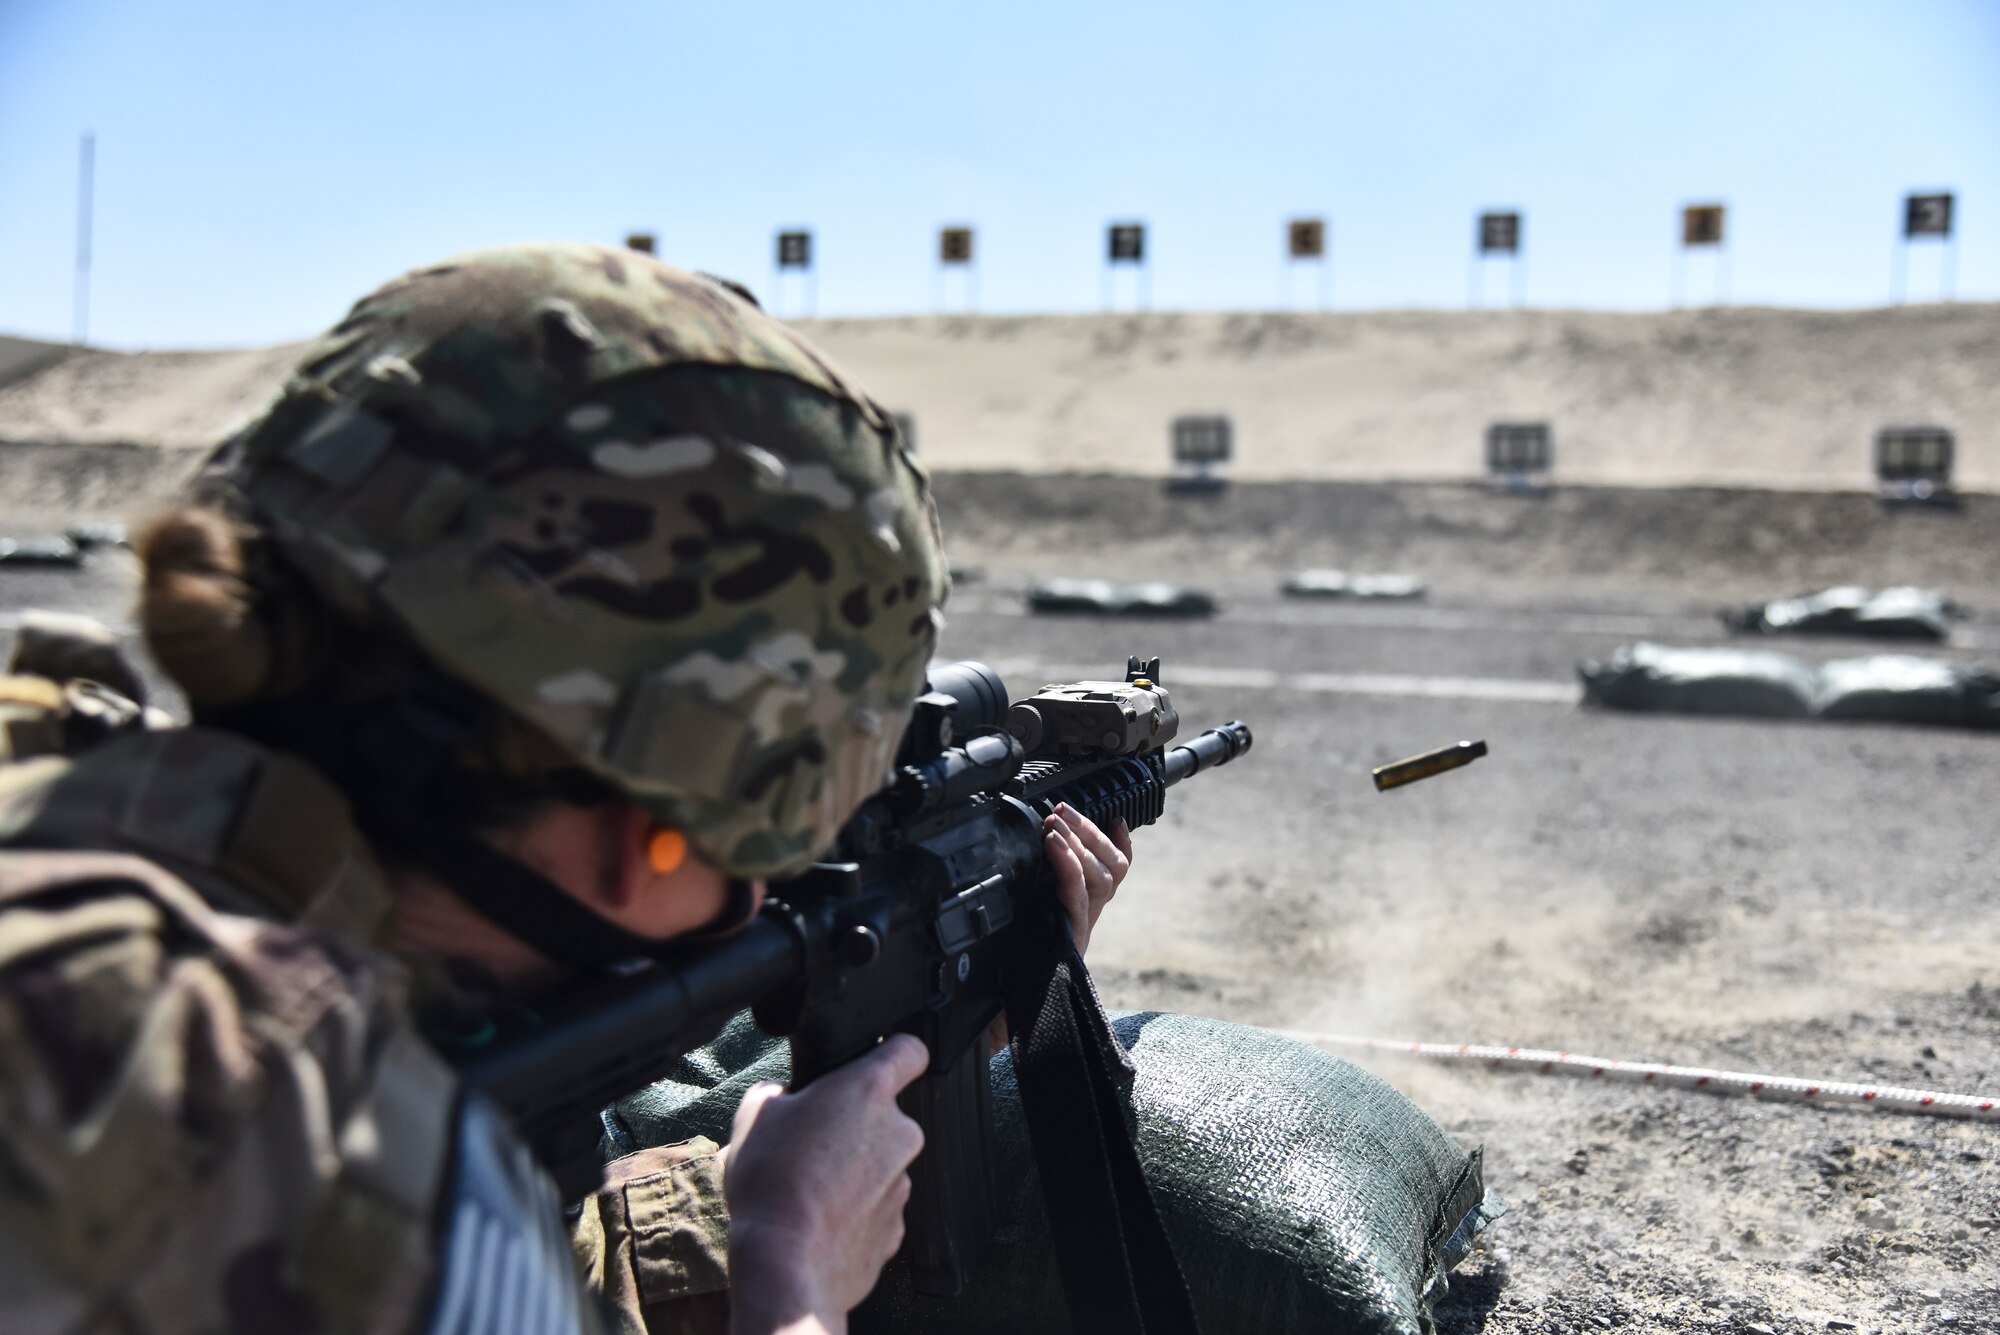 Master Sgt. Leigh Weigold, 380th Expeditionary Security Forces Squadron section chief of plans and programs, fires her weapon at Al Dhafra Air Base, United Arab Emirates, March 8, 2019. As the largest career field in the Air Force, it’s the job of Security Forces to protect, defend and fight to enable U.S. Air Force, Joint and Coalition missions. (U.S. Air Force photo by Senior Airman Mya M. Crosby)